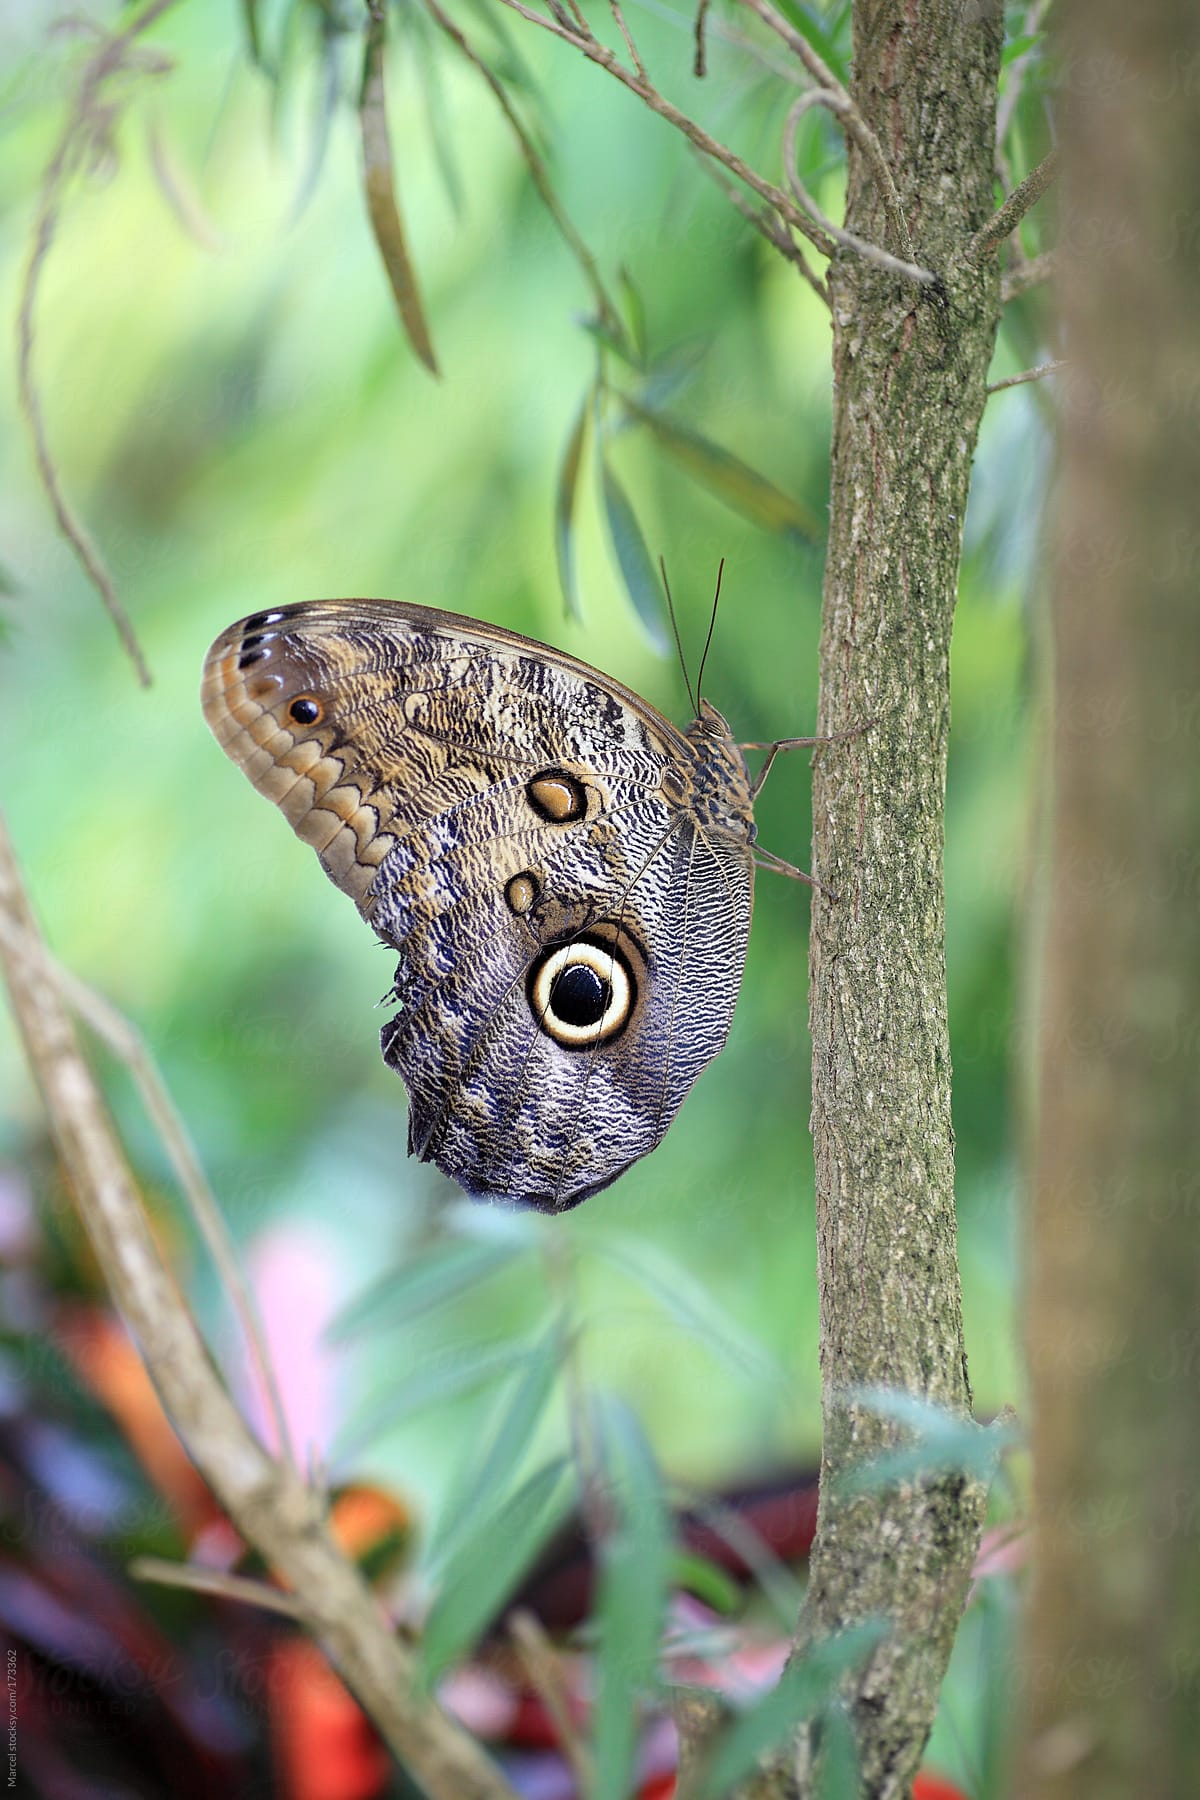 Morpho butterfly resting on a tree